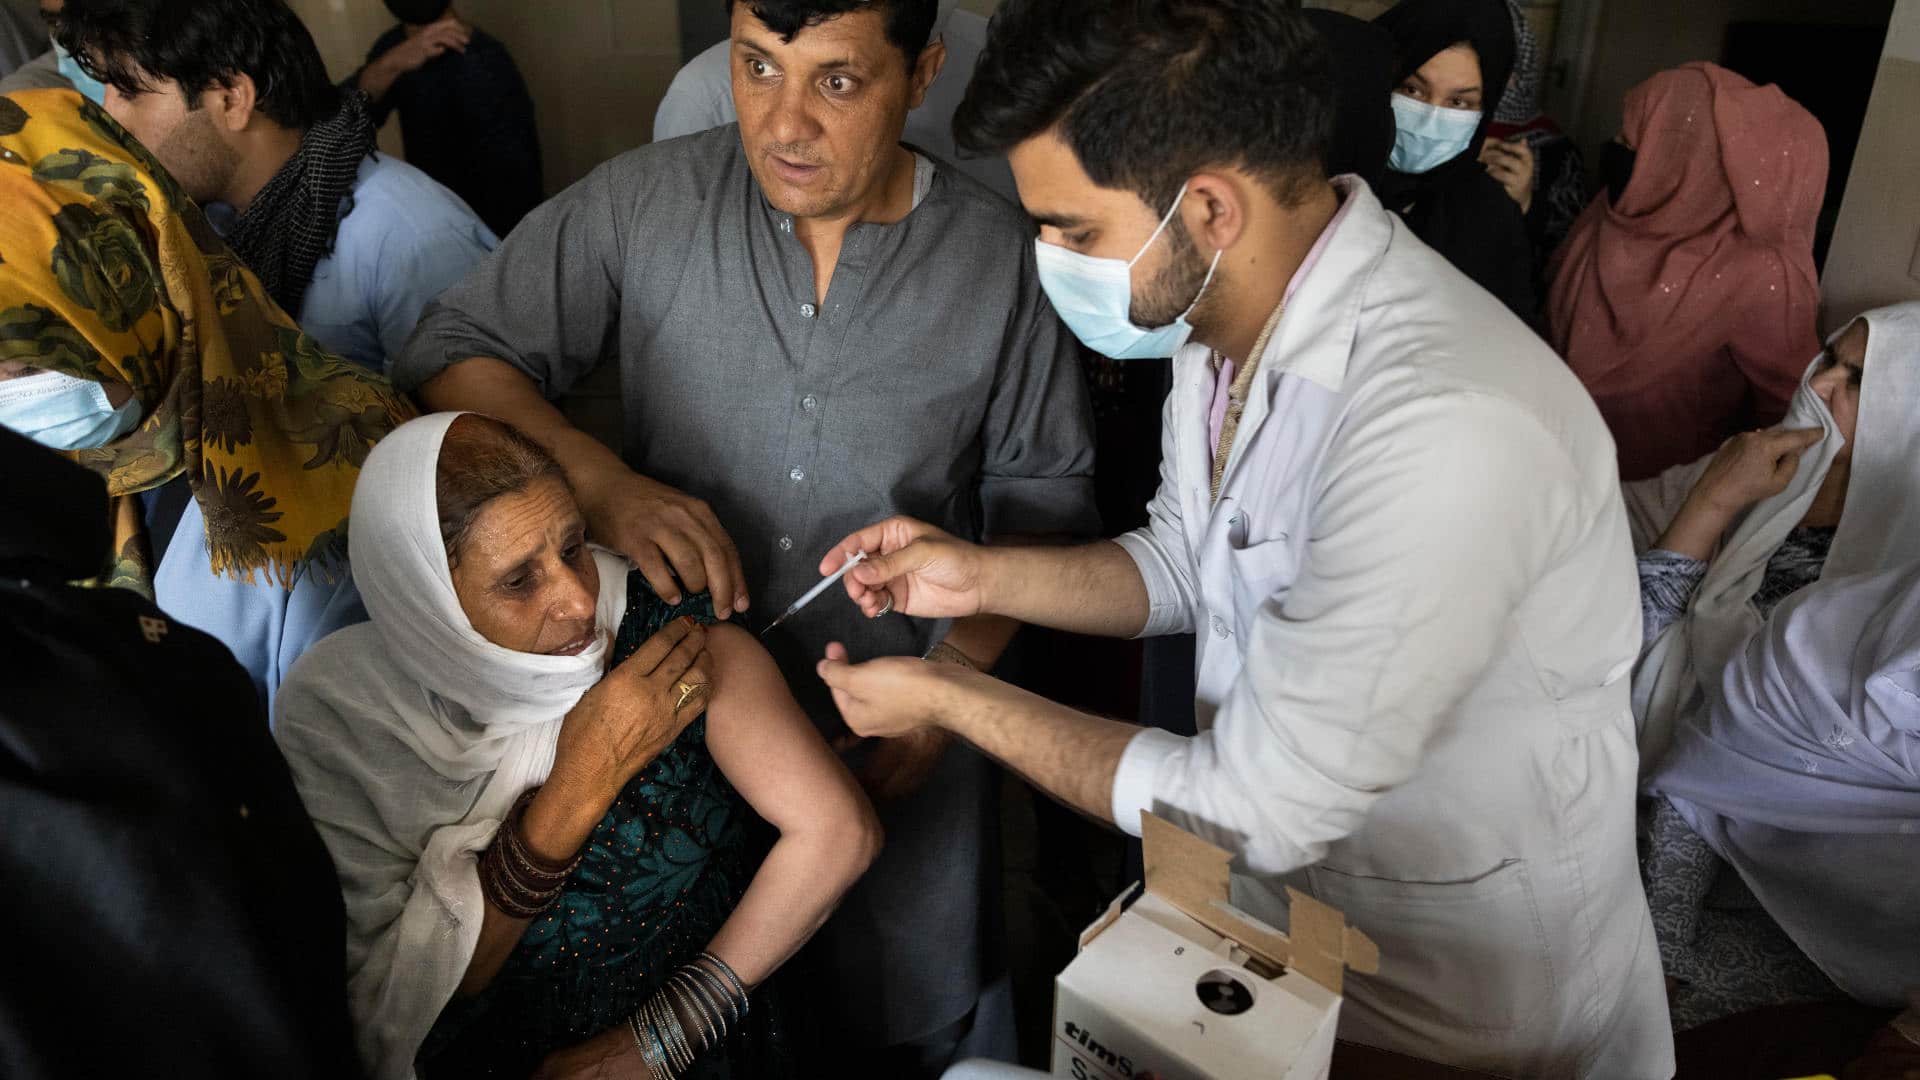 Doctors administer the J&J Covid-19 vaccine to Afghans at the Wazir Akbar Khan hospital in Kabul, Afghanistan in July.